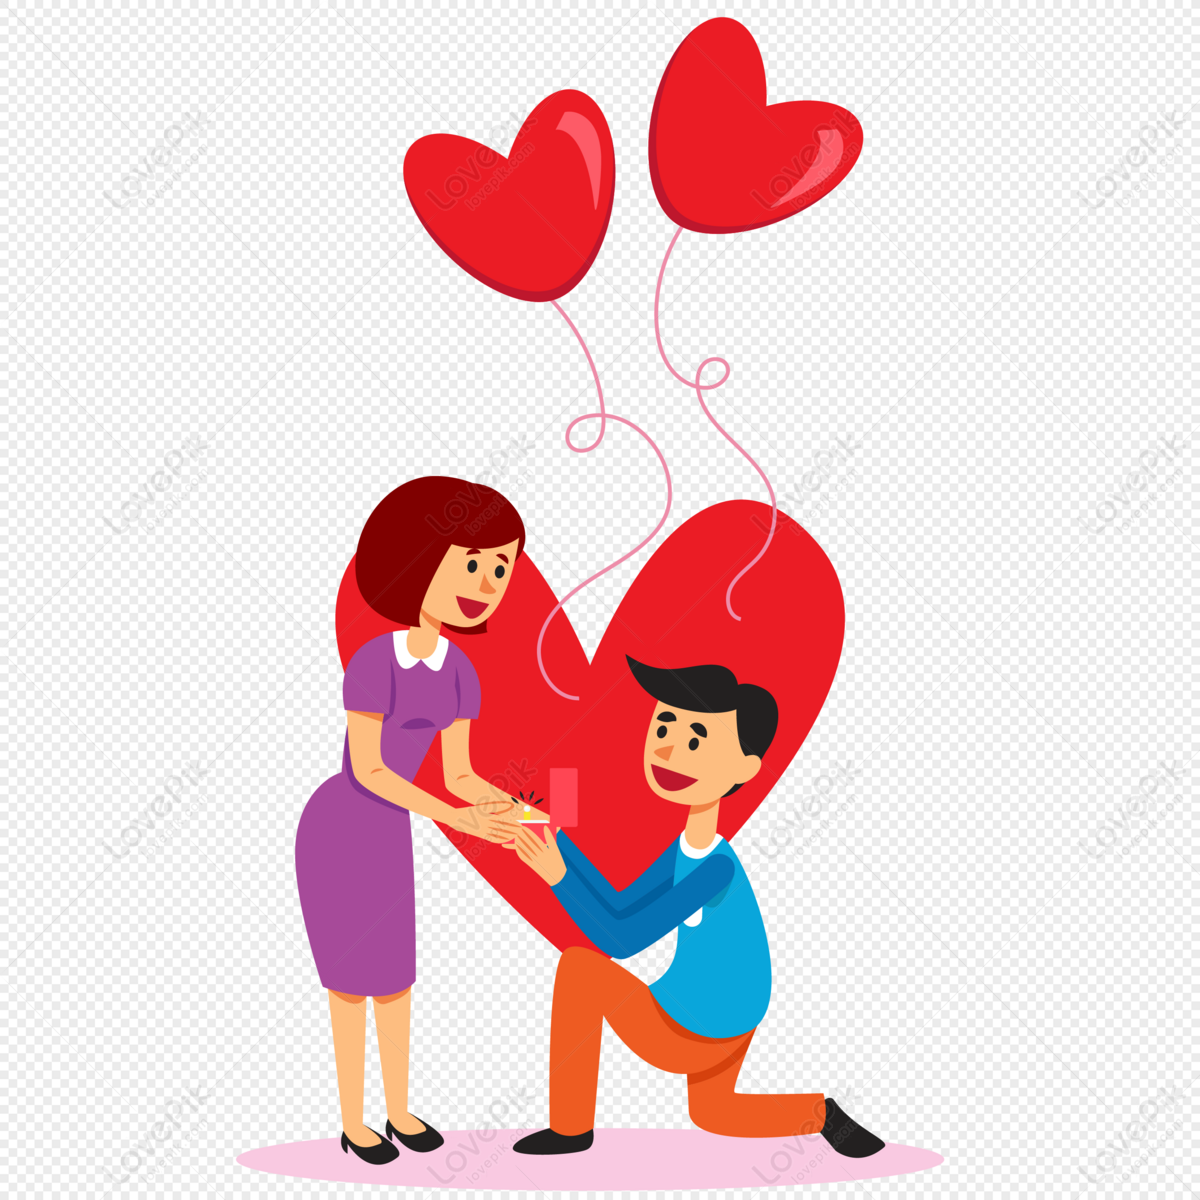 Couples Proposing Marriage Free PNG And Clipart Image For Free ...